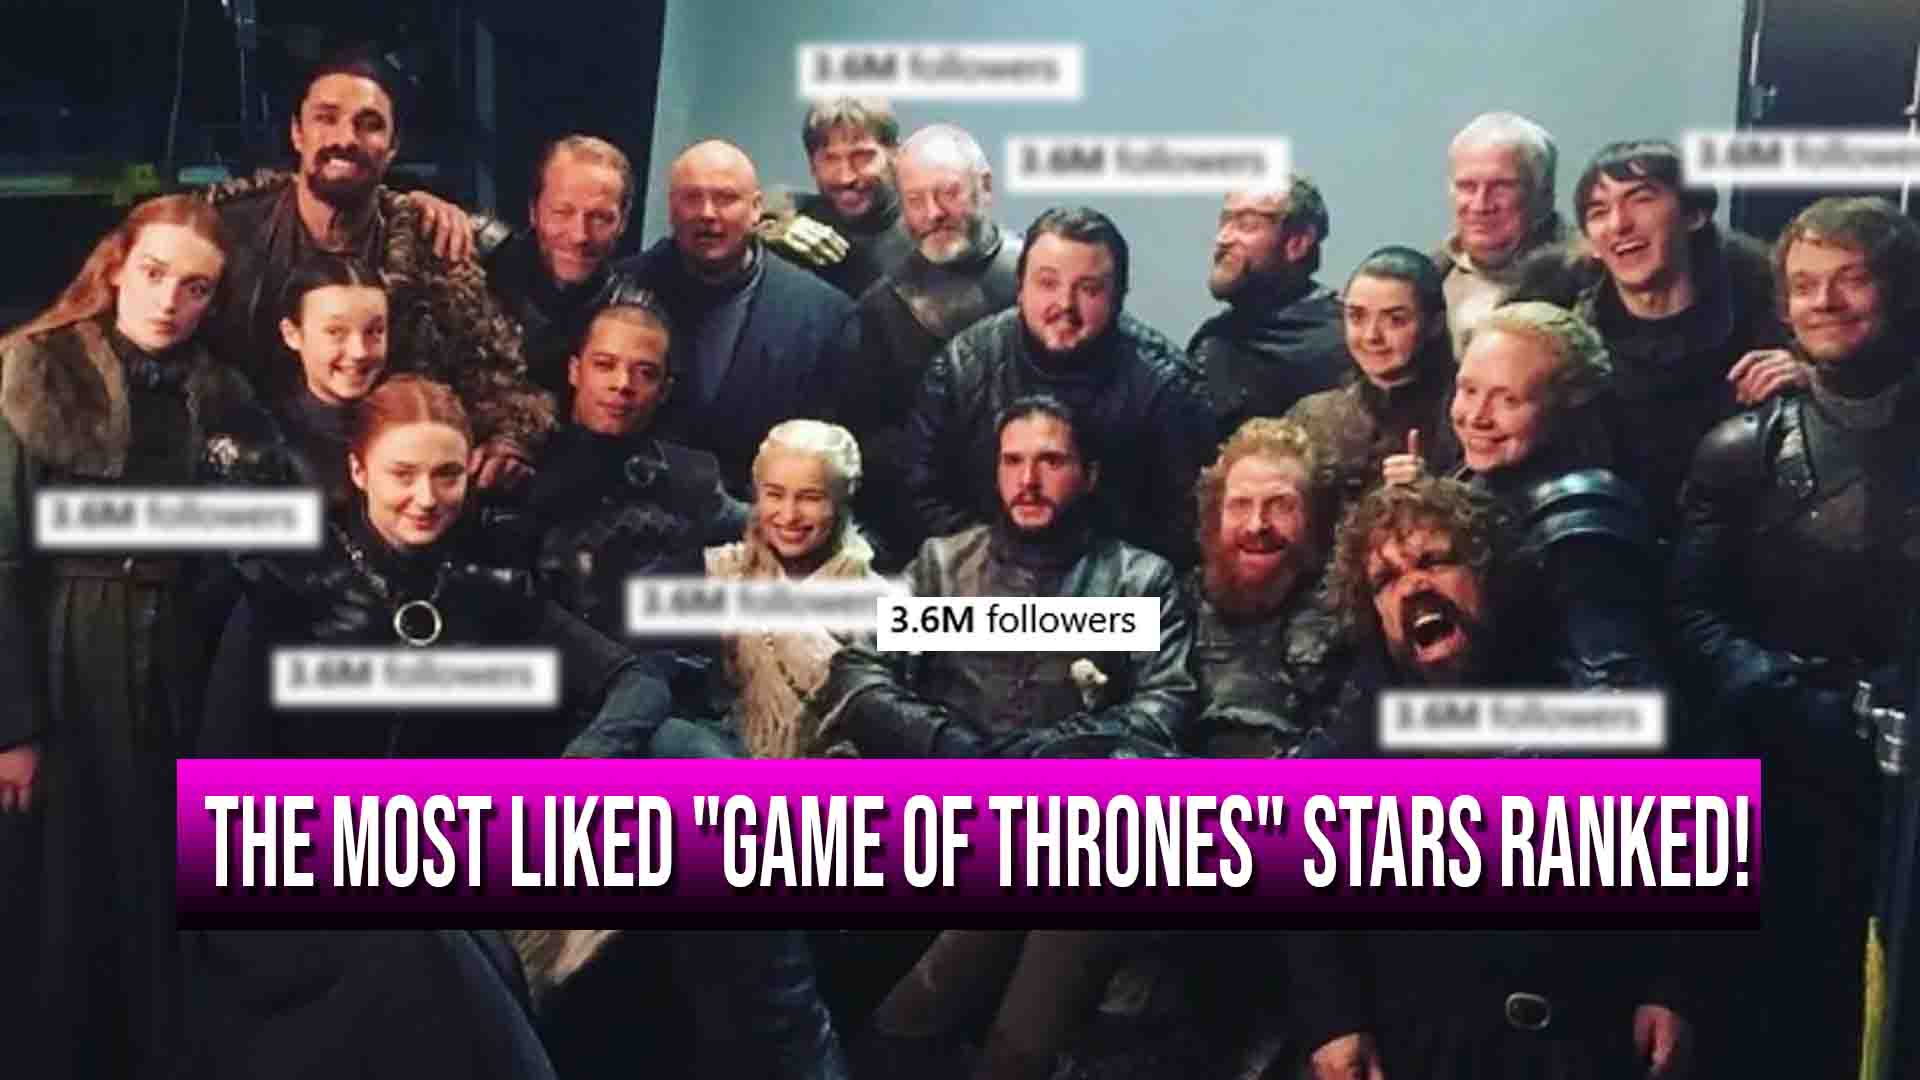 The Most Liked “Game of Thrones” Stars Ranked From Lowest